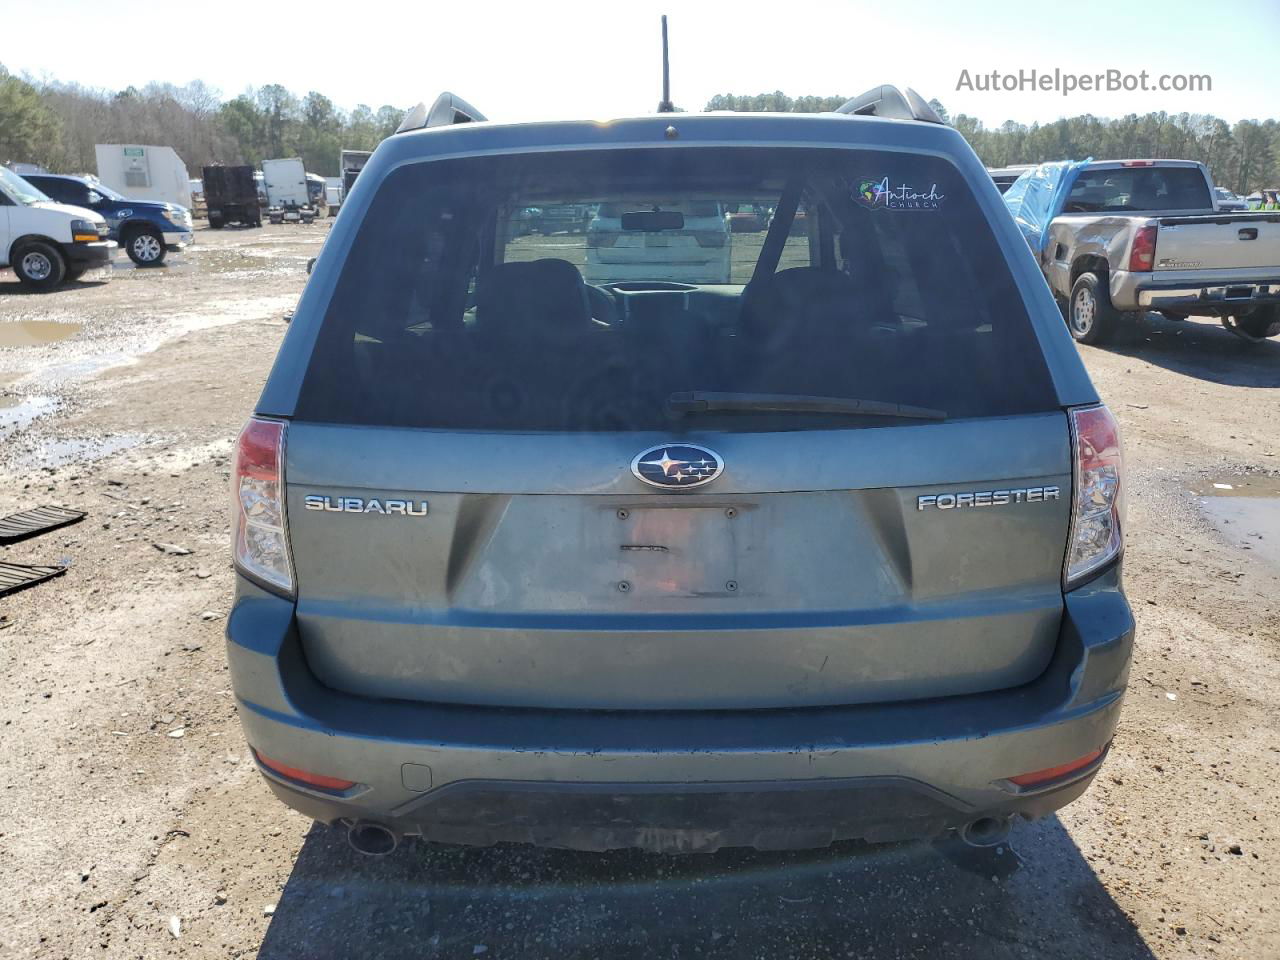 2009 Subaru Forester 2.5x Limited Бирюзовый vin: JF2SH64619H761820